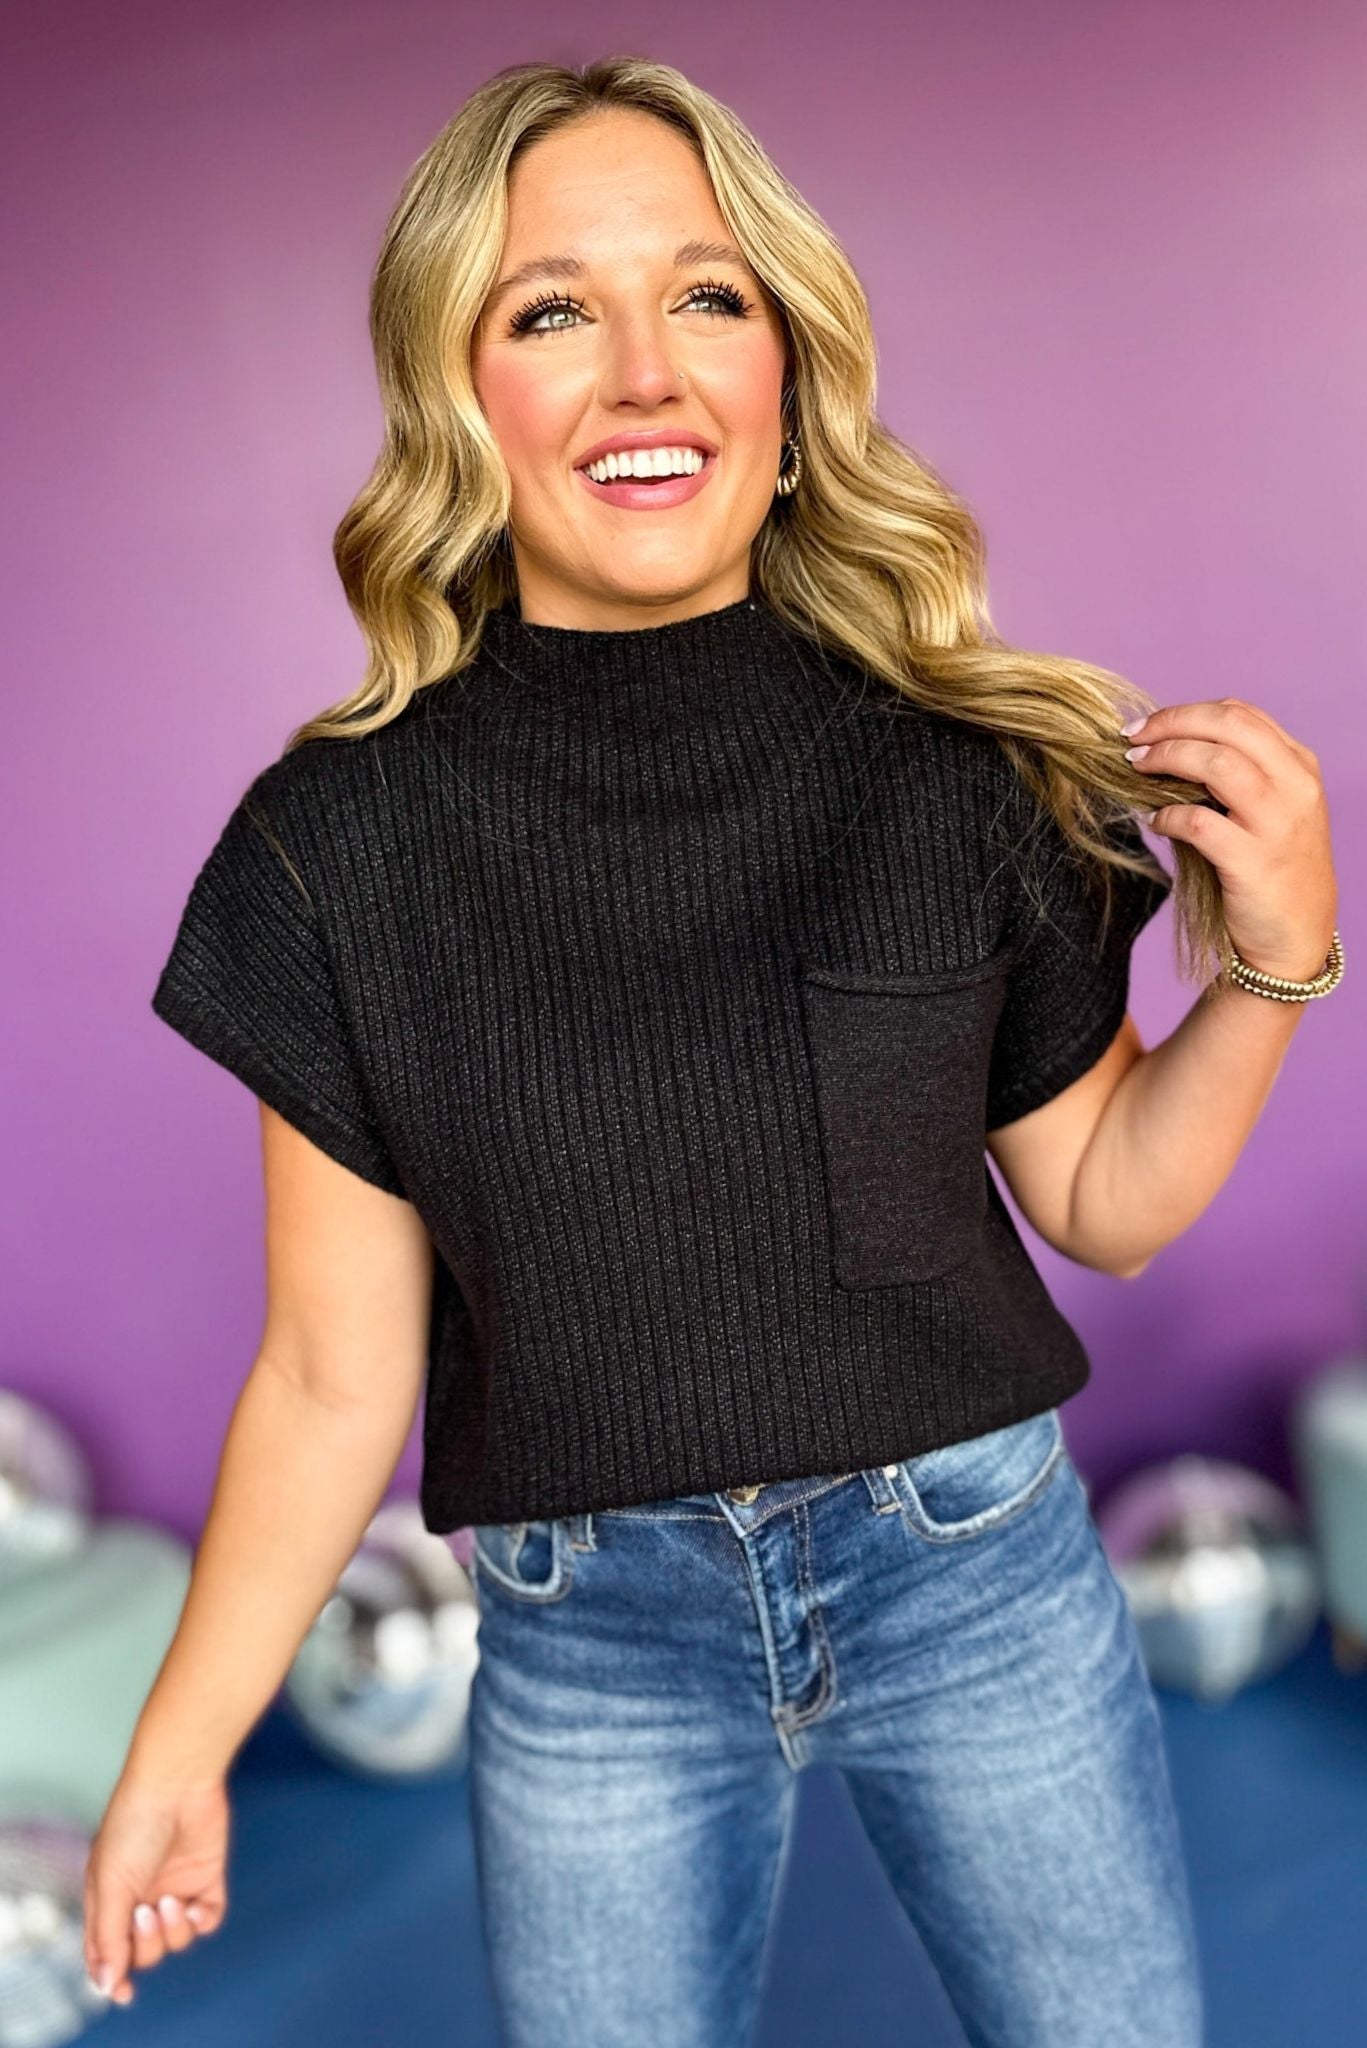 Black Knitted Pocket Detail Mock Neck Cropped Top, must have top, must have style, must have fall, fall collection, fall fashion, elevated style, elevated top, mom style, fall style, cropped top, pocket detail, shop style your senses by mallory fitzsimmons